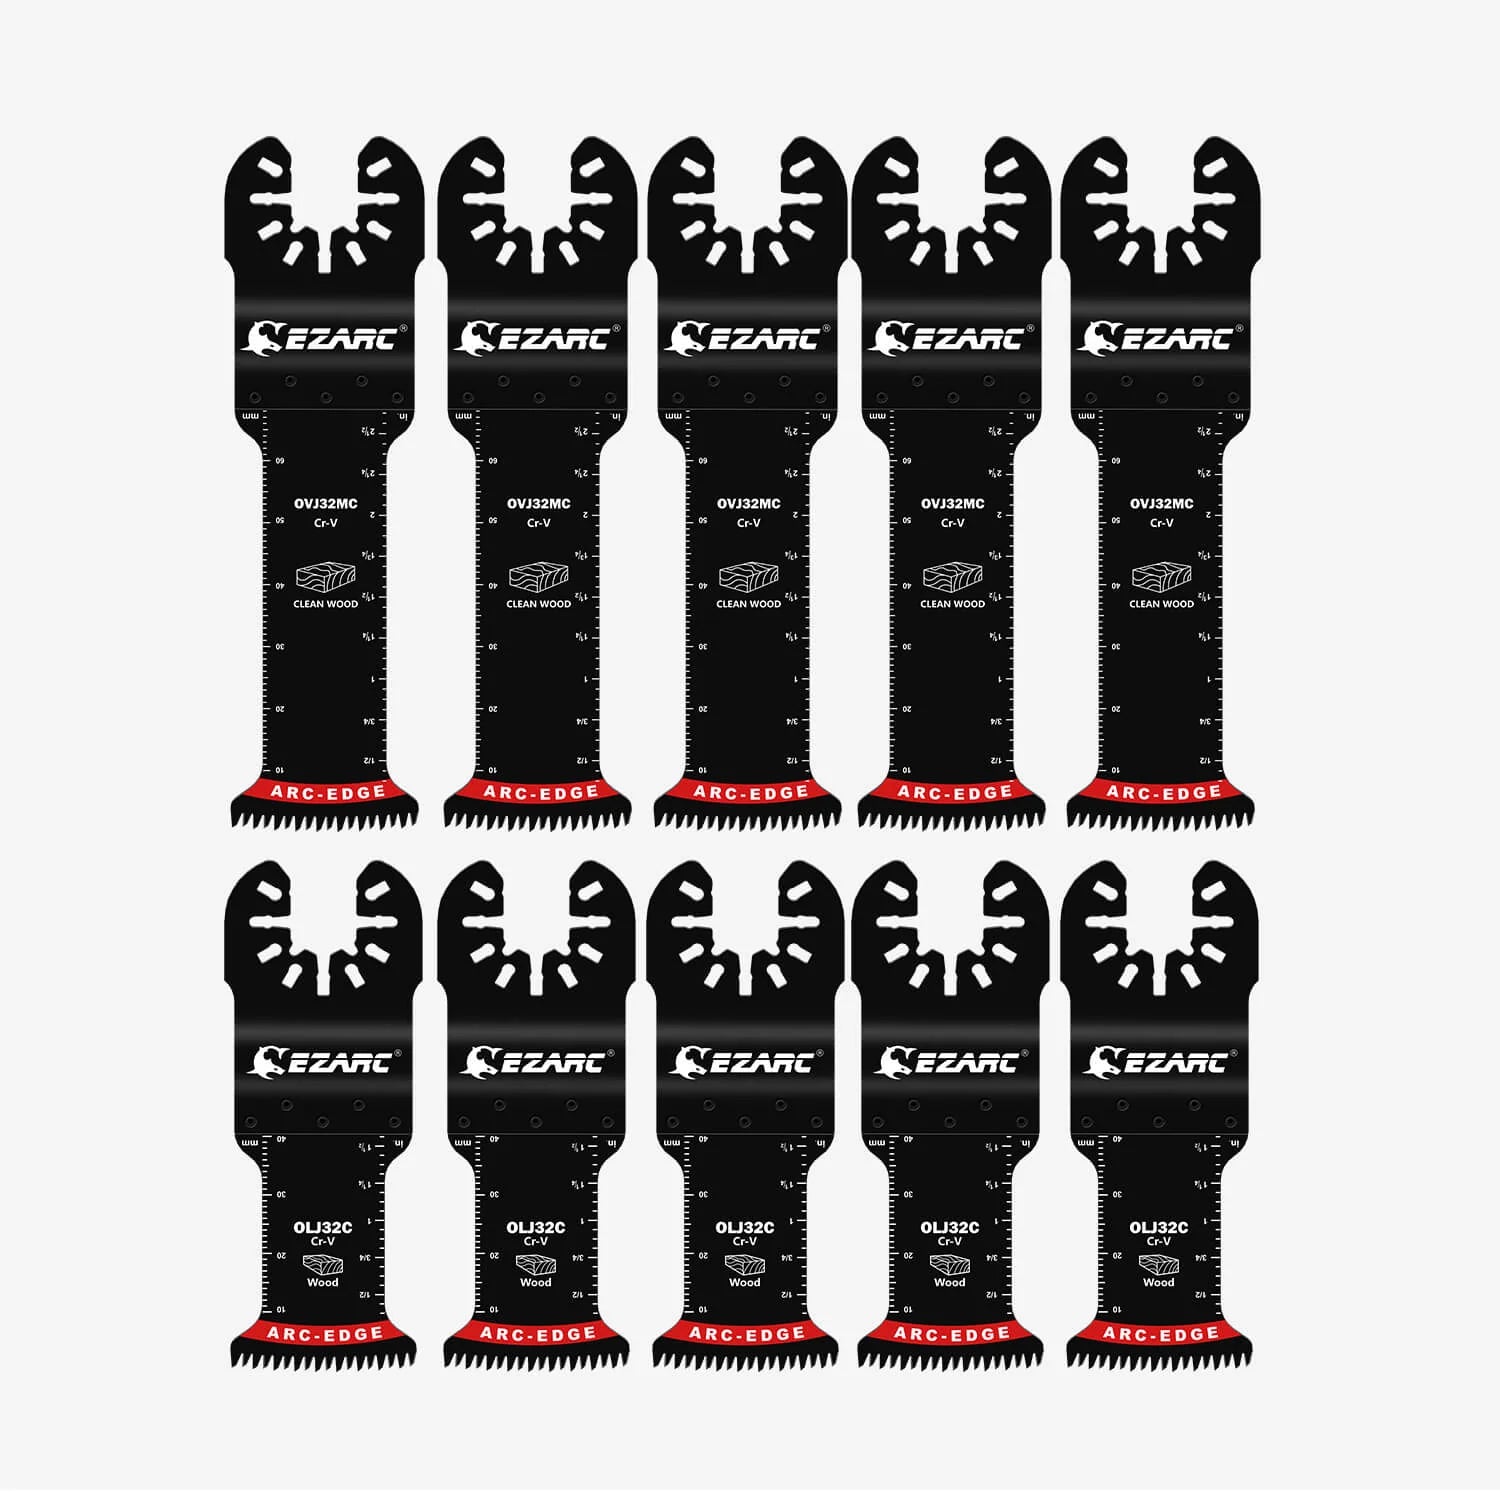 1-1/4 in. Arc Edge Oscillating Multitool Blades For General Purpose,Mixed Standard+Extra Long